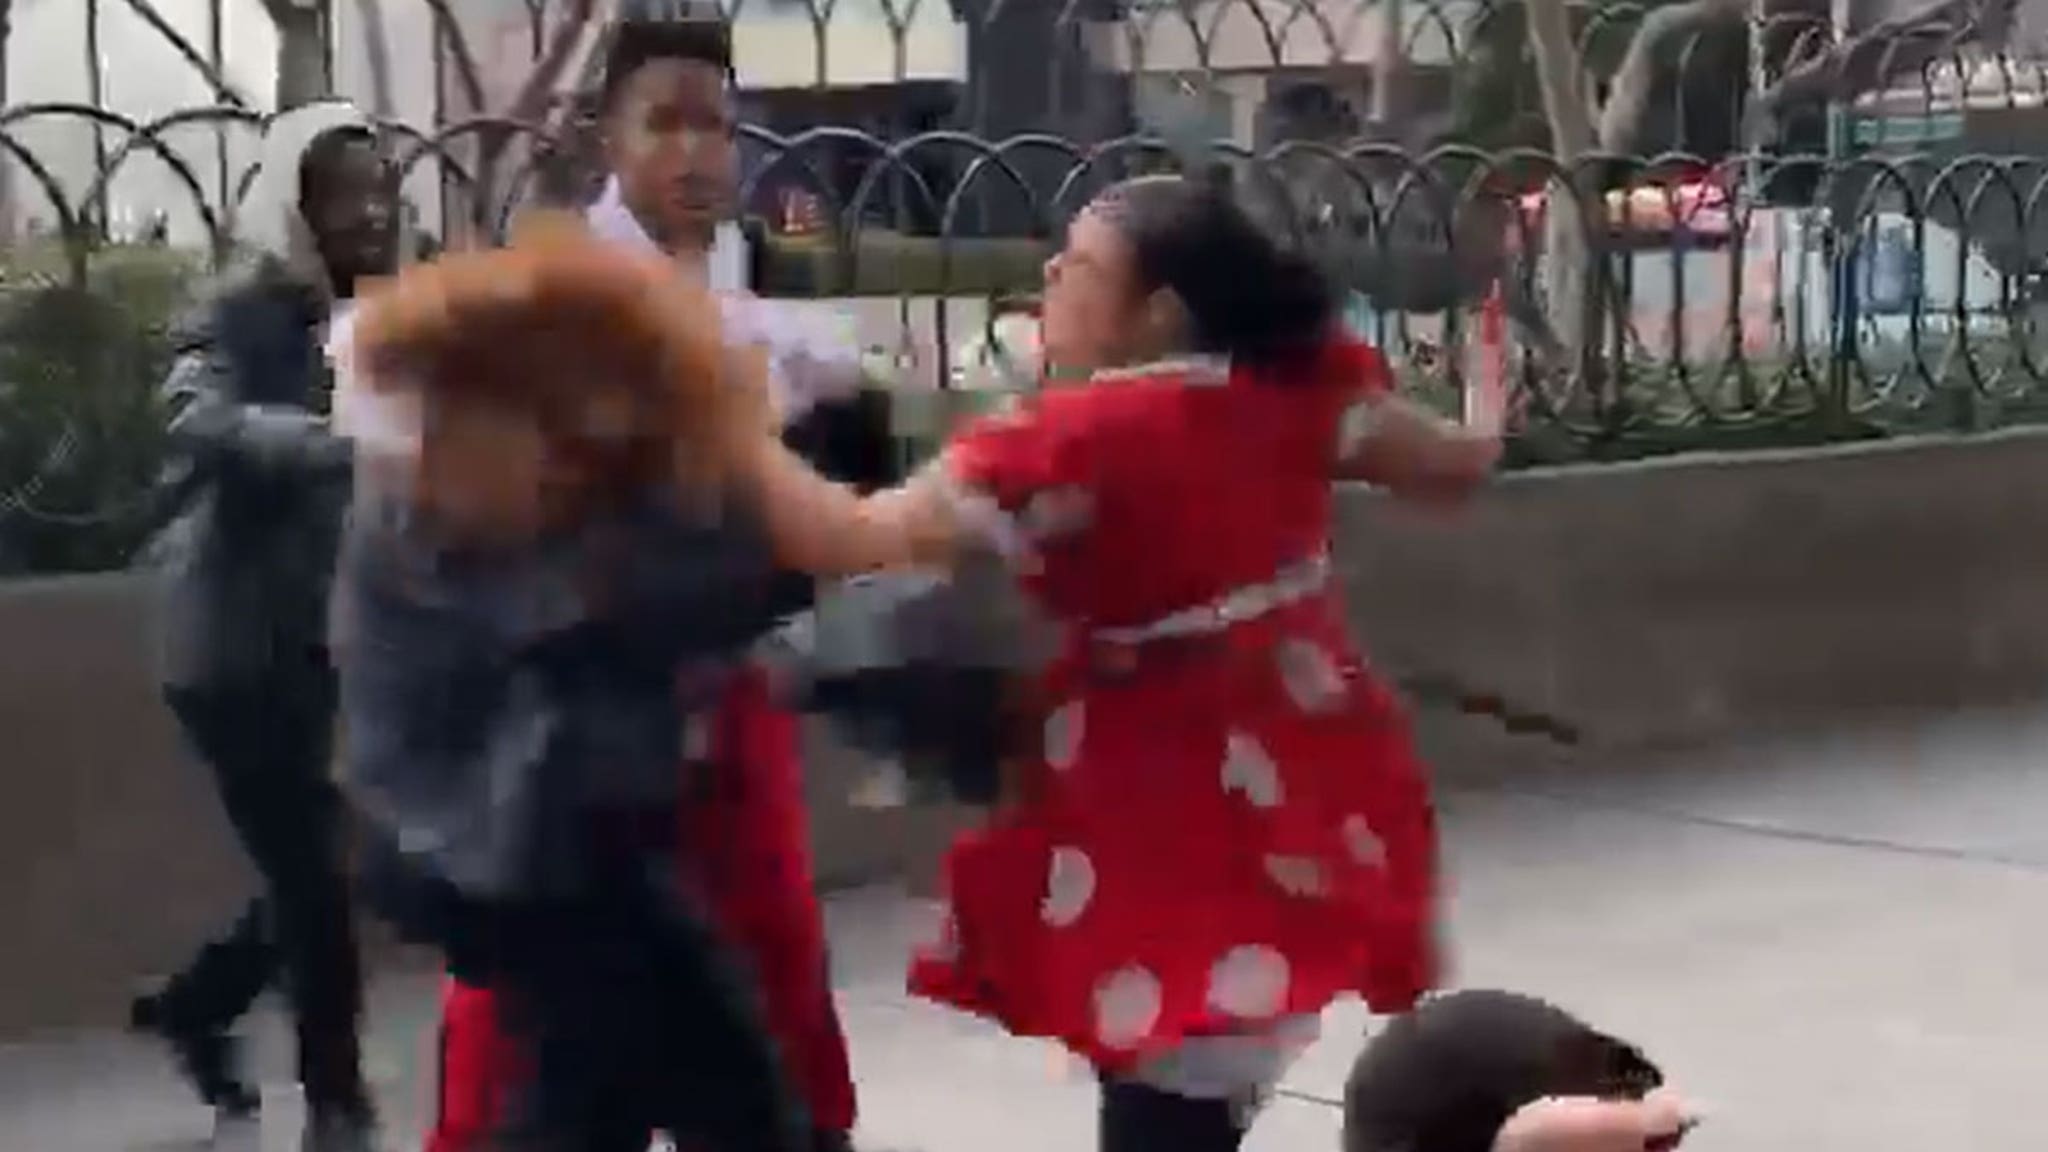 Minnie Mouse Vs Security Fight Video Cops Want To Talk To The Women